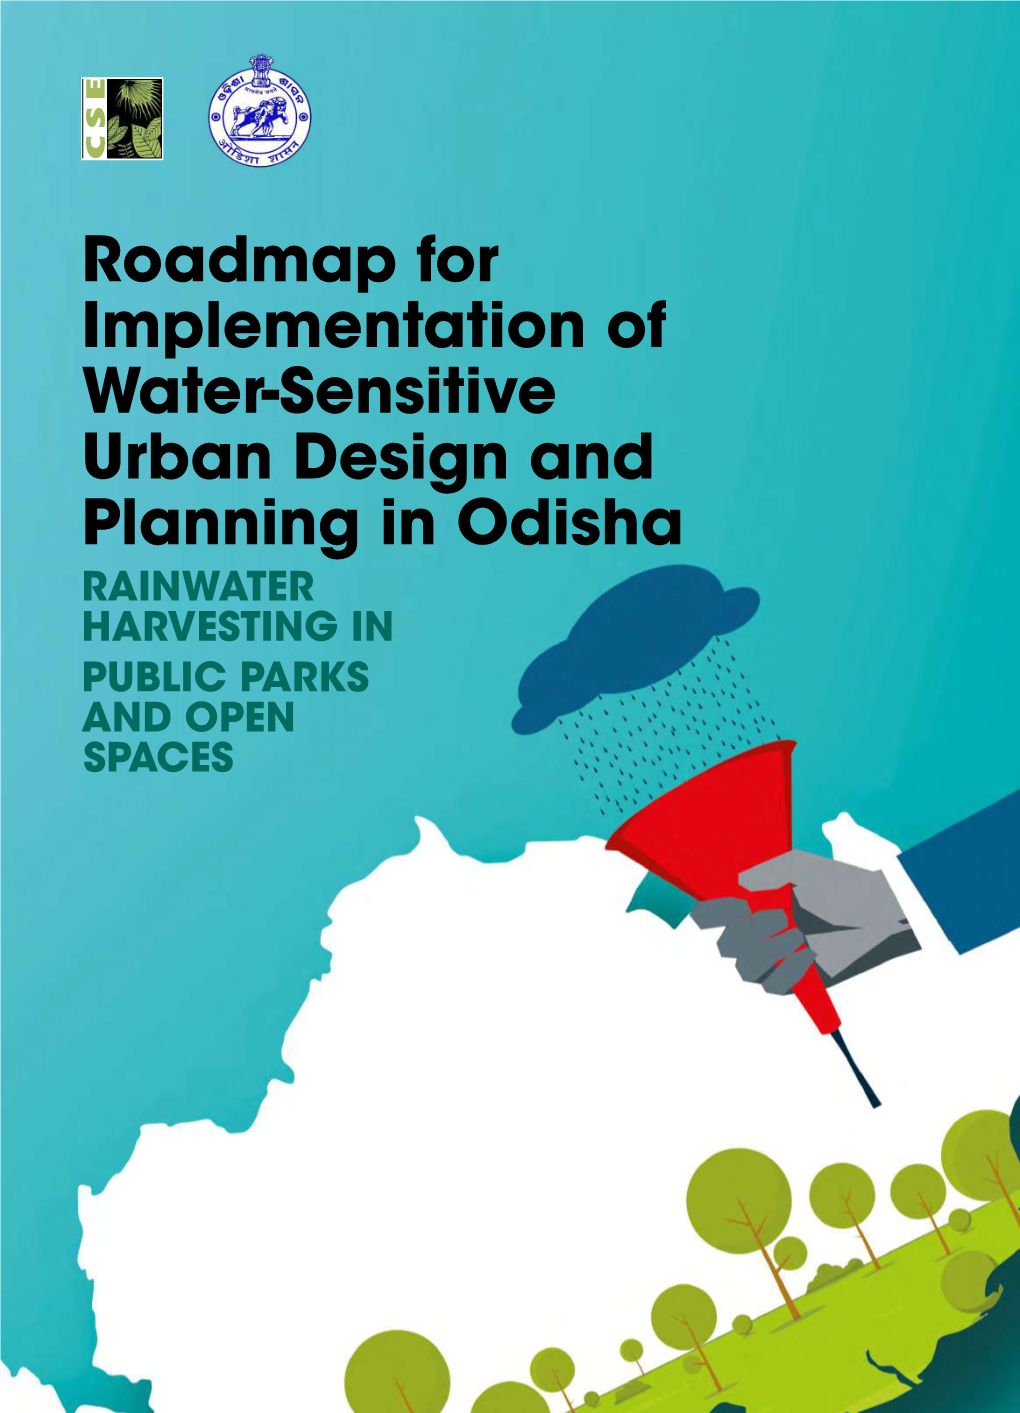 Roadmap for Implementation of Water-Sensitive Urban Design and Planning in Odisha RAINWATER HARVESTING in PUBLIC PARKS and OPEN SPACES